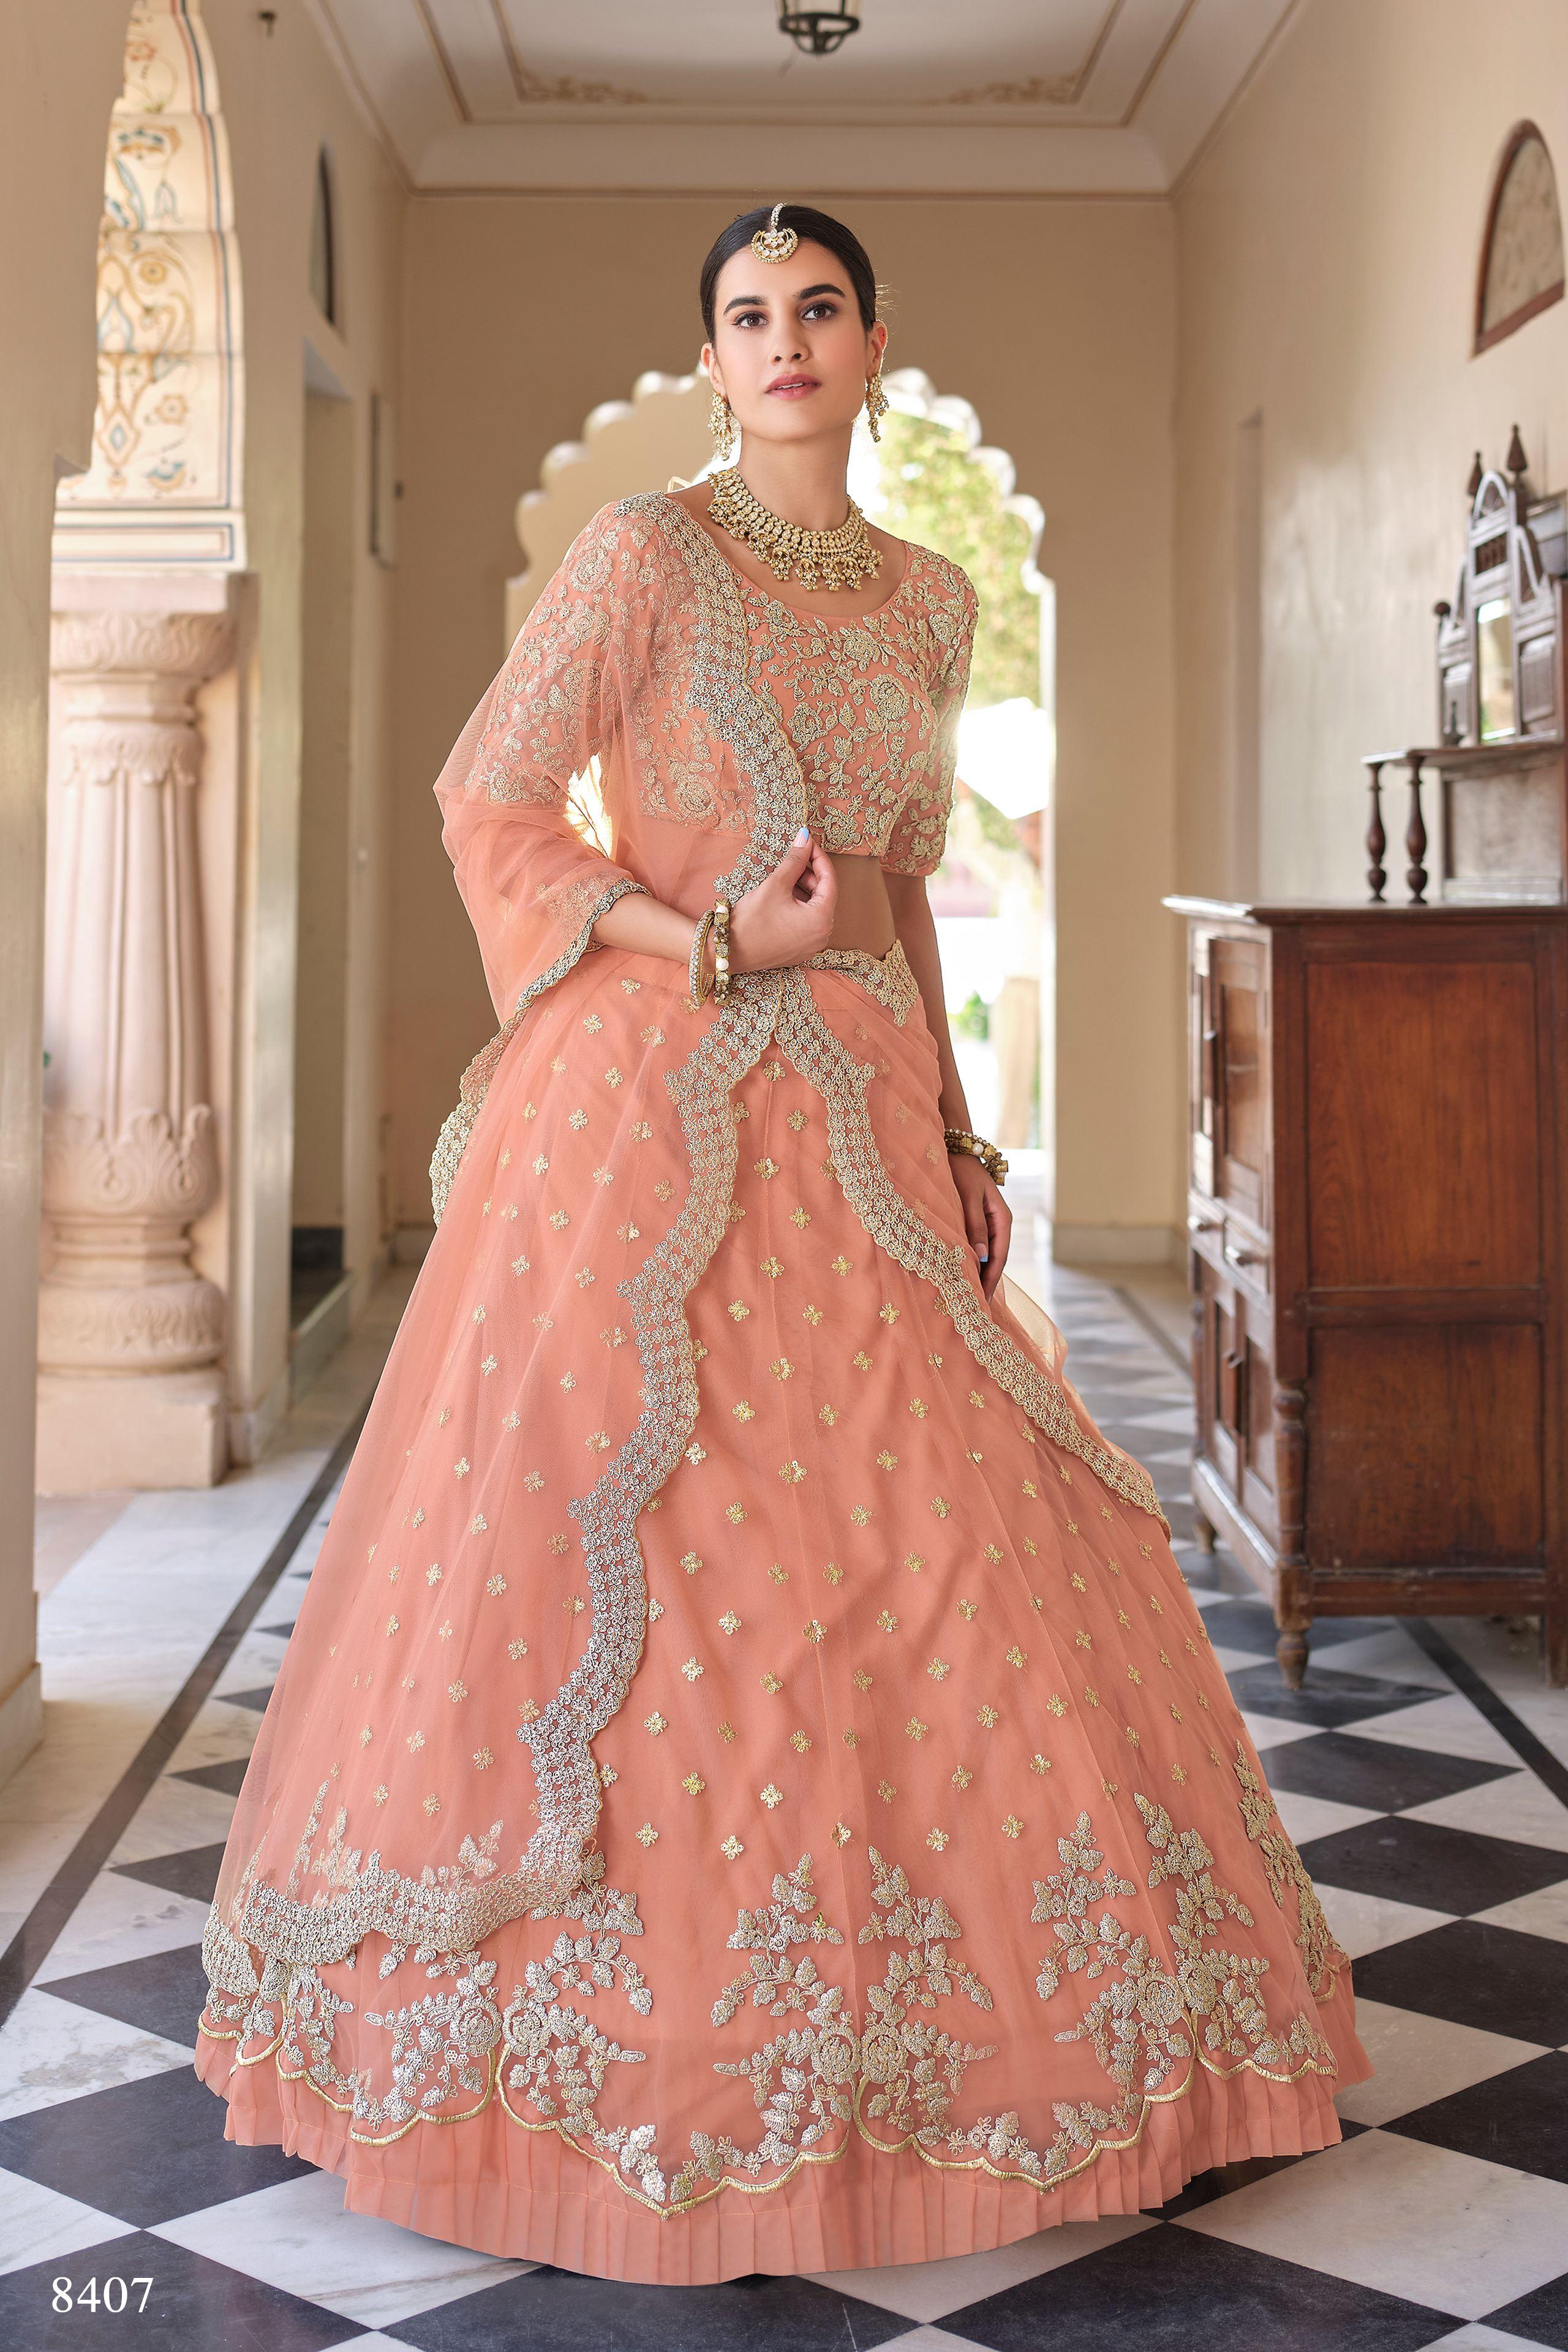 Buy Astha Bridal green butta lehenga Online at Low prices in India on  Winsant, India fastest… | Bridal lehenga choli, Bridal lehenga online,  Indian designer outfits